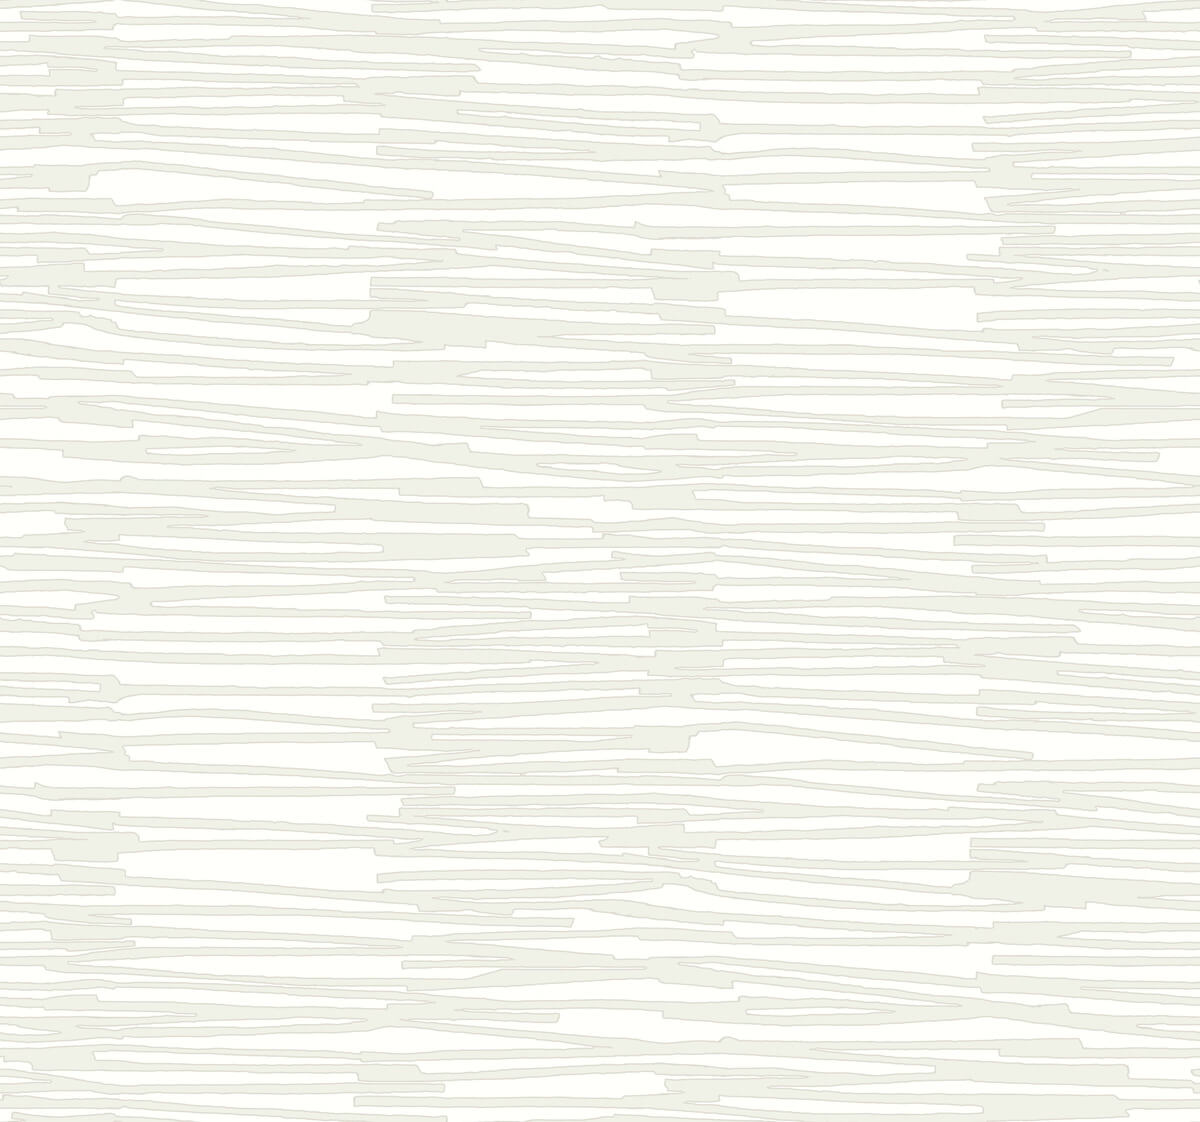 Artistic Abstracts Water Reed Thatch Wallpaper - White